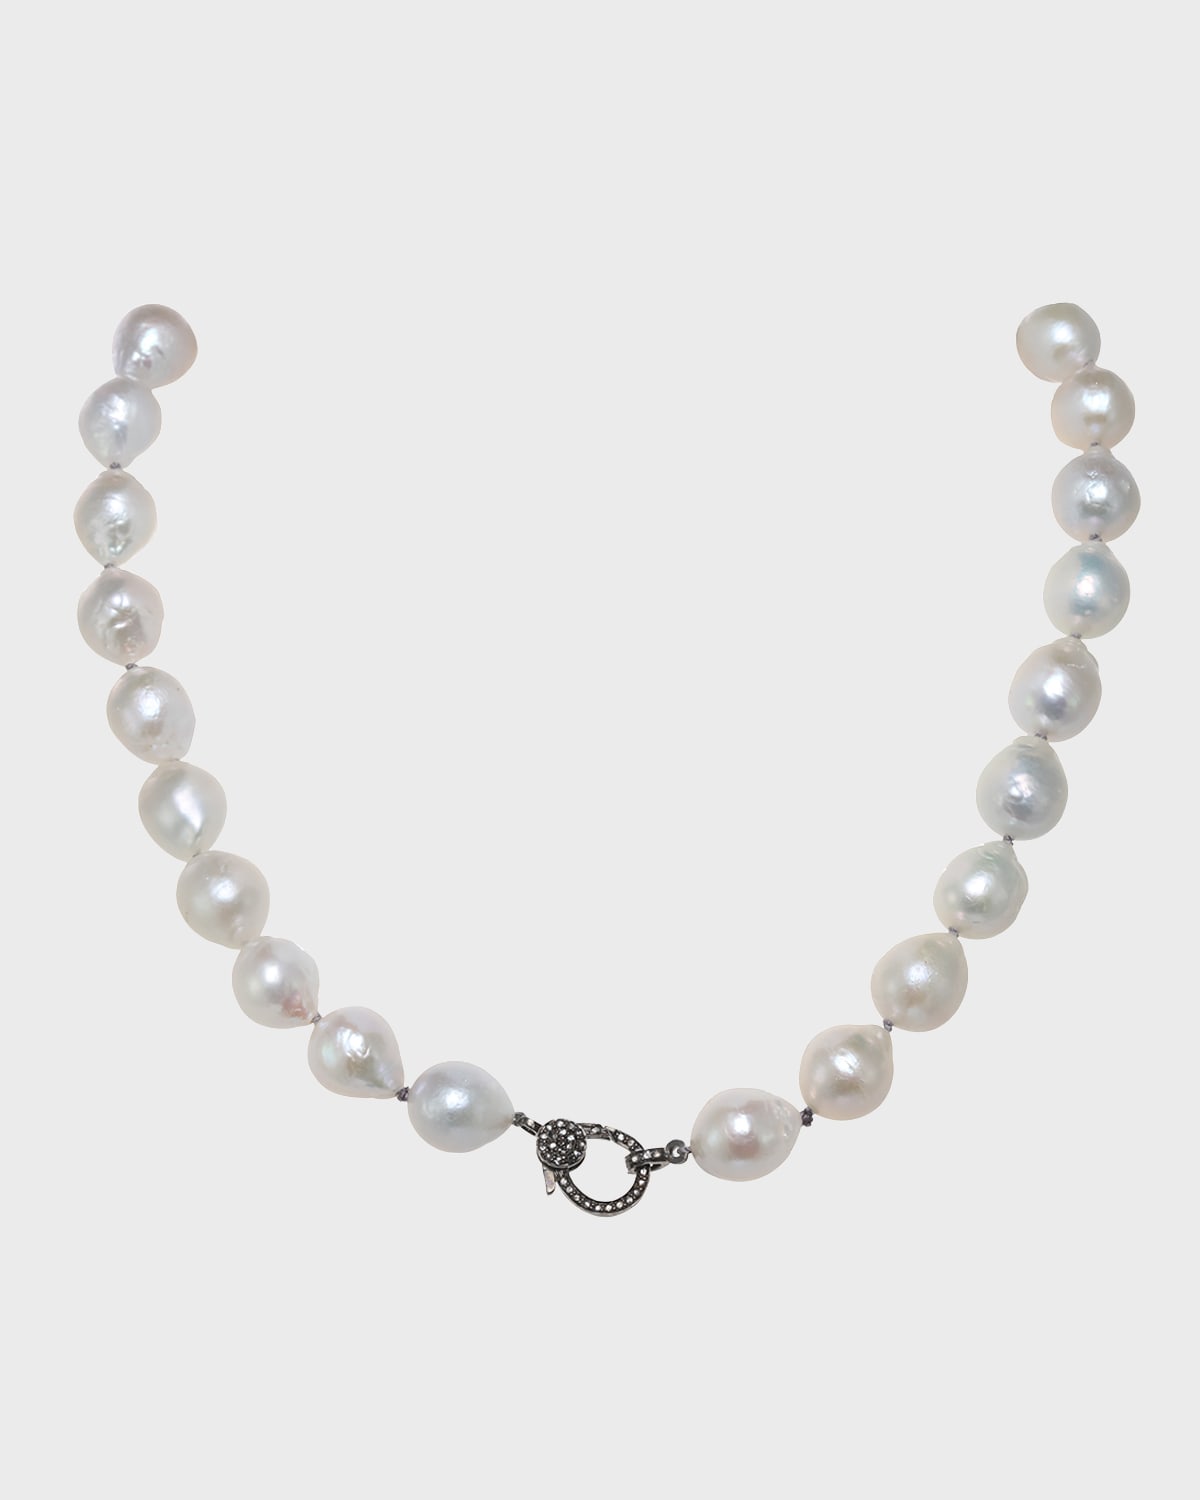 Margo Morrison Small White Baroque Pearl Necklace With Diamond Clasp, 10-12mm, 18"l